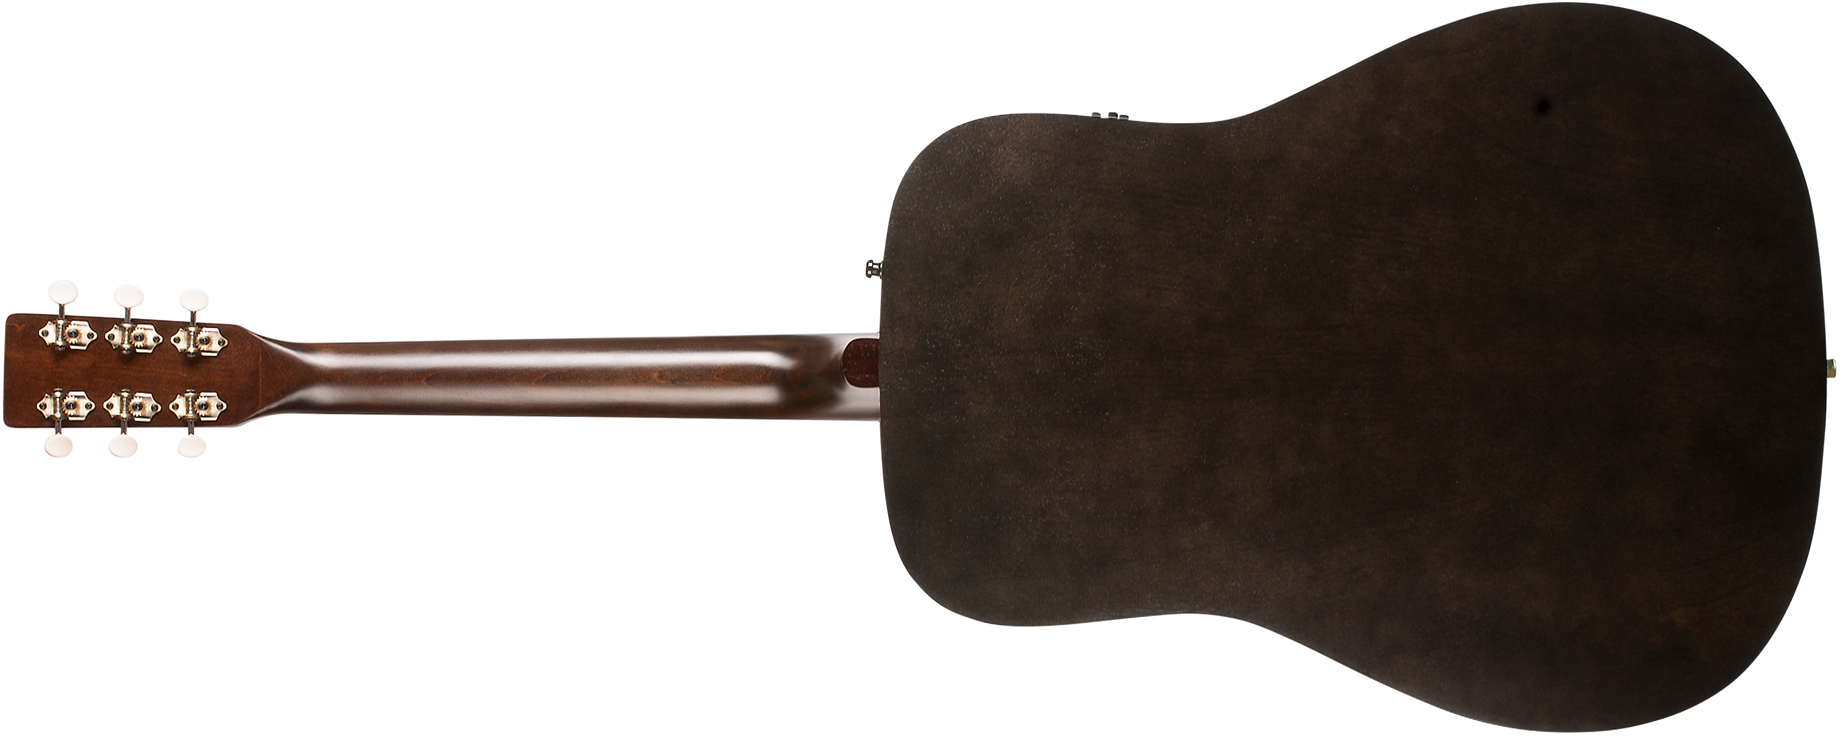 Art Et Lutherie Americana Presys Ii Dreadnought Cedre Merisier Rw - Faded Black - Electro acoustic guitar - Variation 1